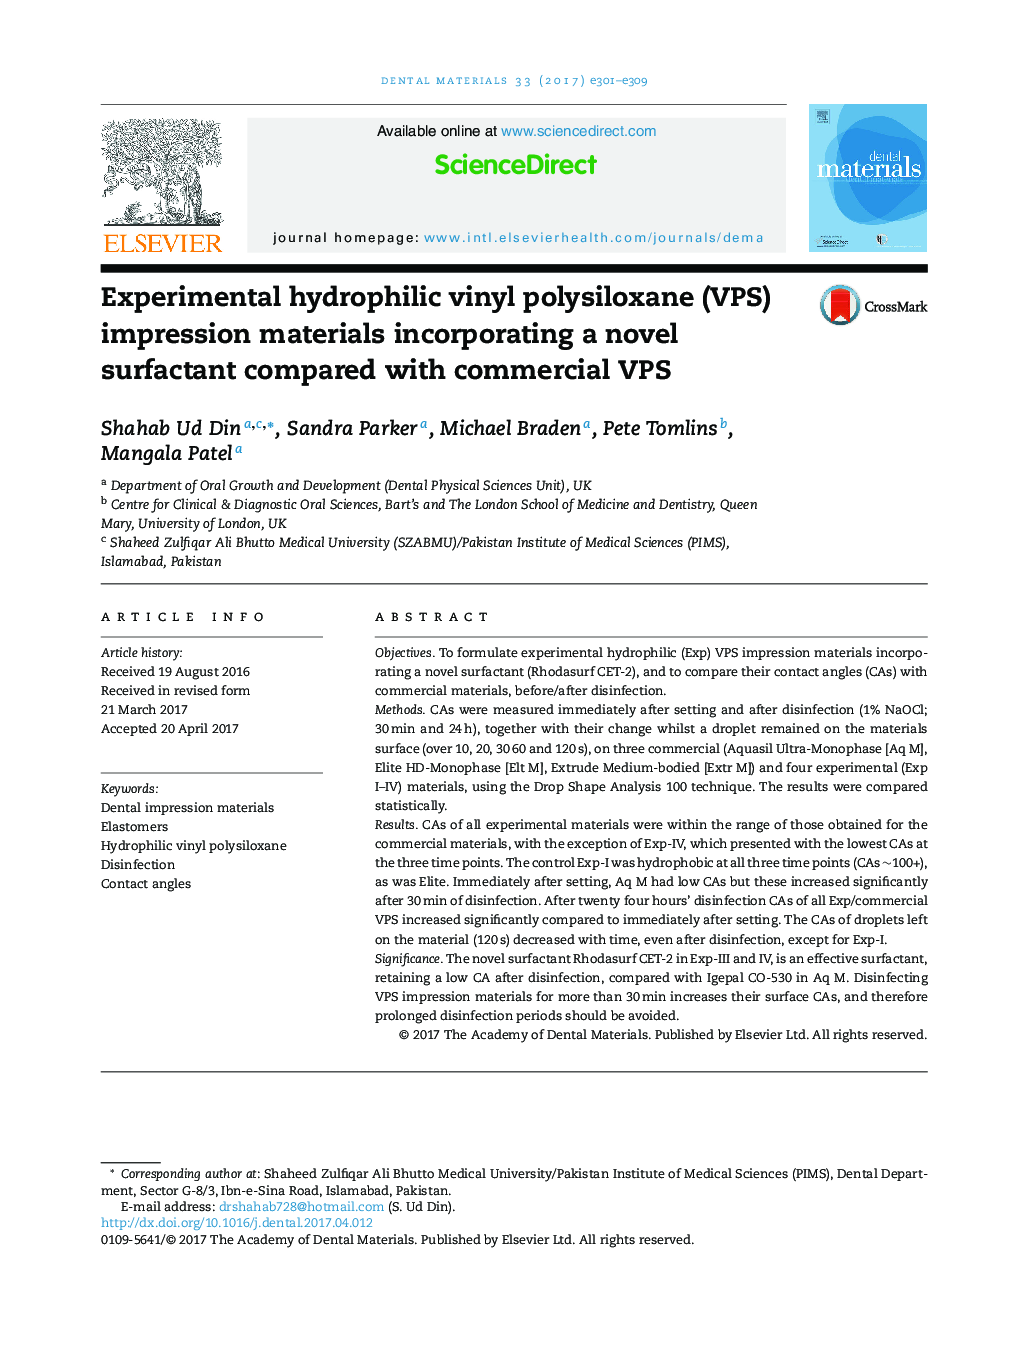 Experimental hydrophilic vinyl polysiloxane (VPS) impression materials incorporating a novel surfactant compared with commercial VPS